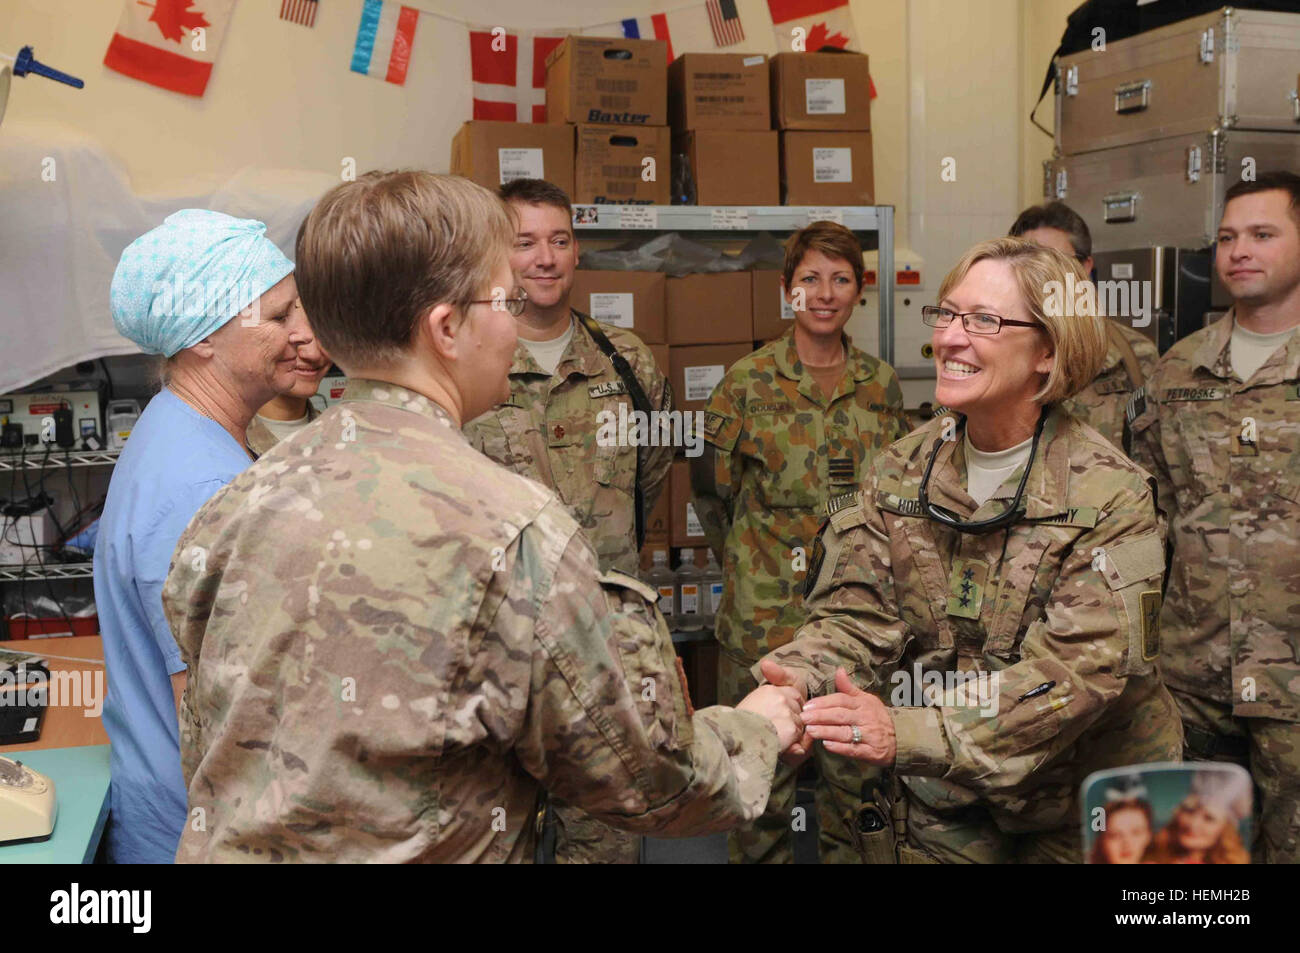 U.S. Army Lt. Gen. Patricia Horoho, right, the 43rd Army surgeon general, meets with Service members at Kandahar Airfield's Role 3 hospital in Kandahar province, Afghanistan, April 18, 2013.  (U.S. Army photo by Sgt. Ashley Bell/Released) Service Surgeon Generals visit RC-South 130418-A-VM825-163 Stock Photo